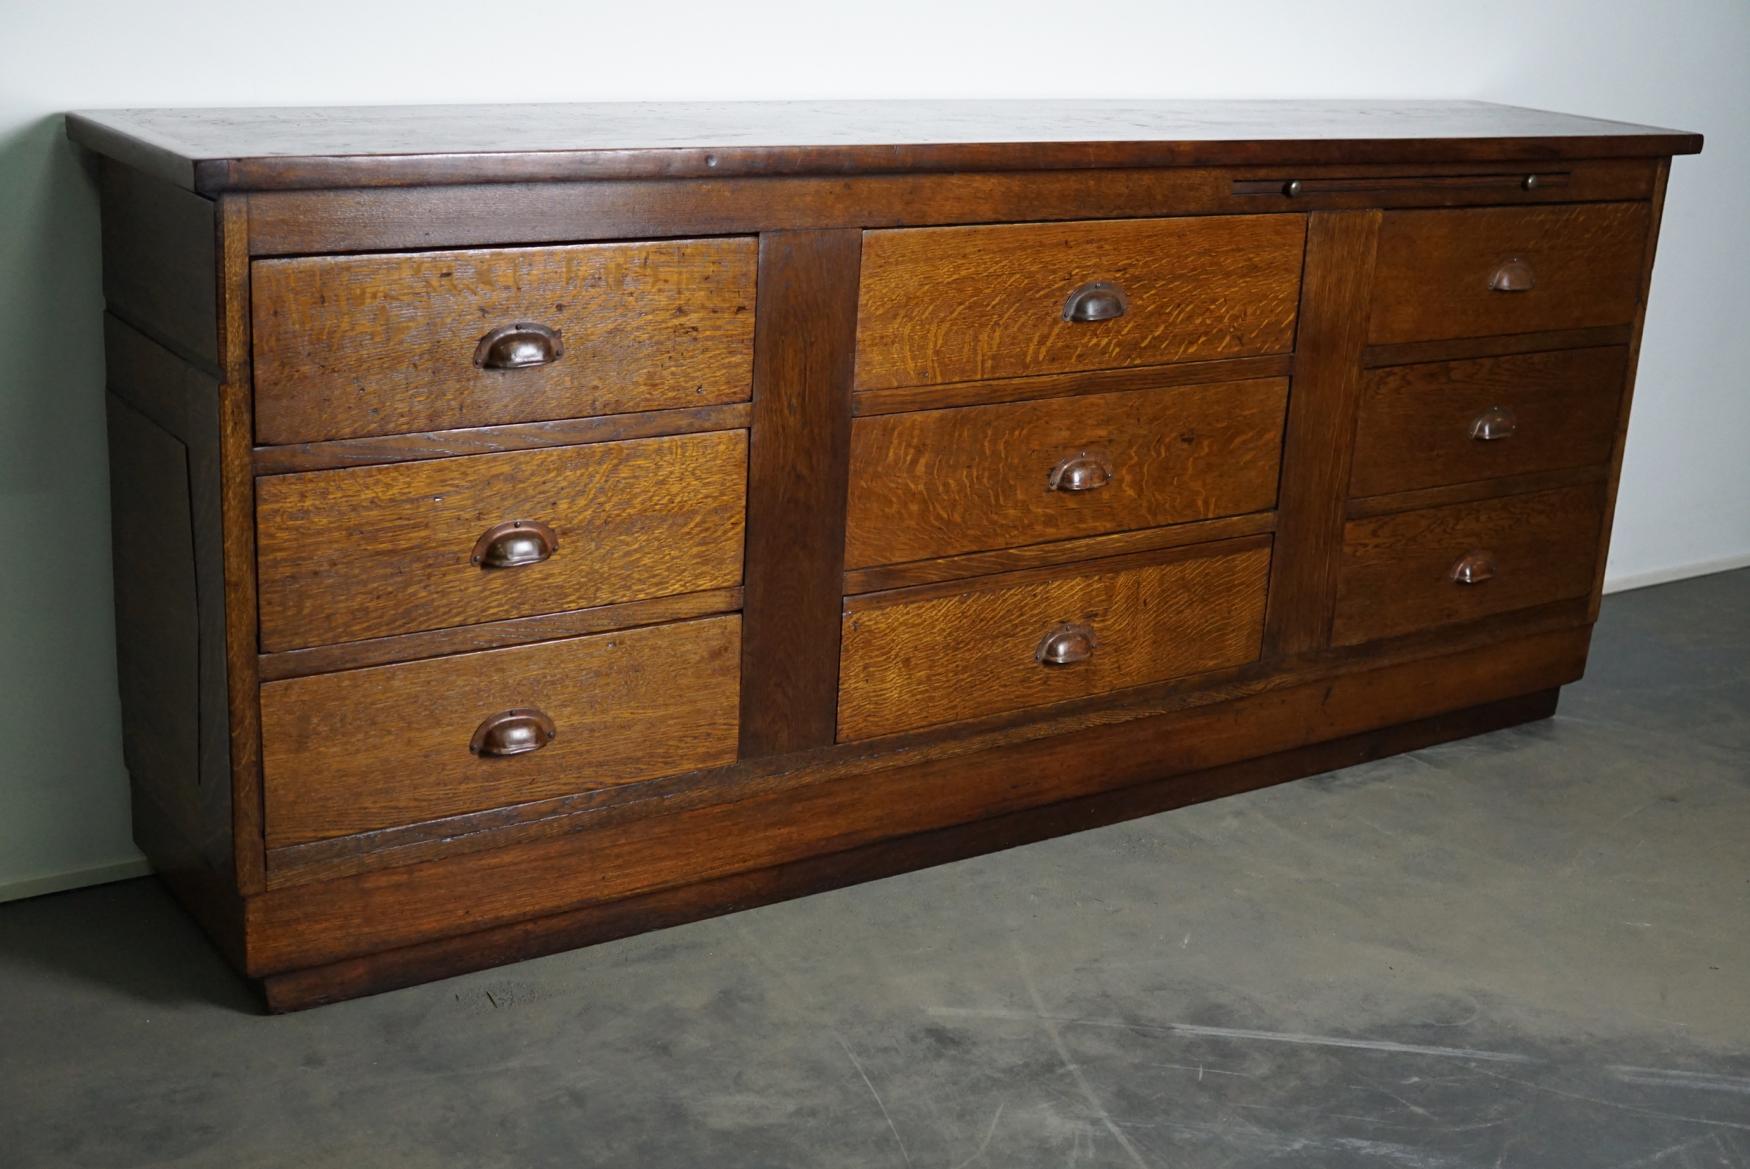 This apothecary cabinet was made circa 1930s in the Netherlands. It features 9 drawers with nice metal handles. It is made from oak and it remains in a very good condition. The interior dimensions of the drawers are: D x W x H 30.5 x 48.5 x 13 cm